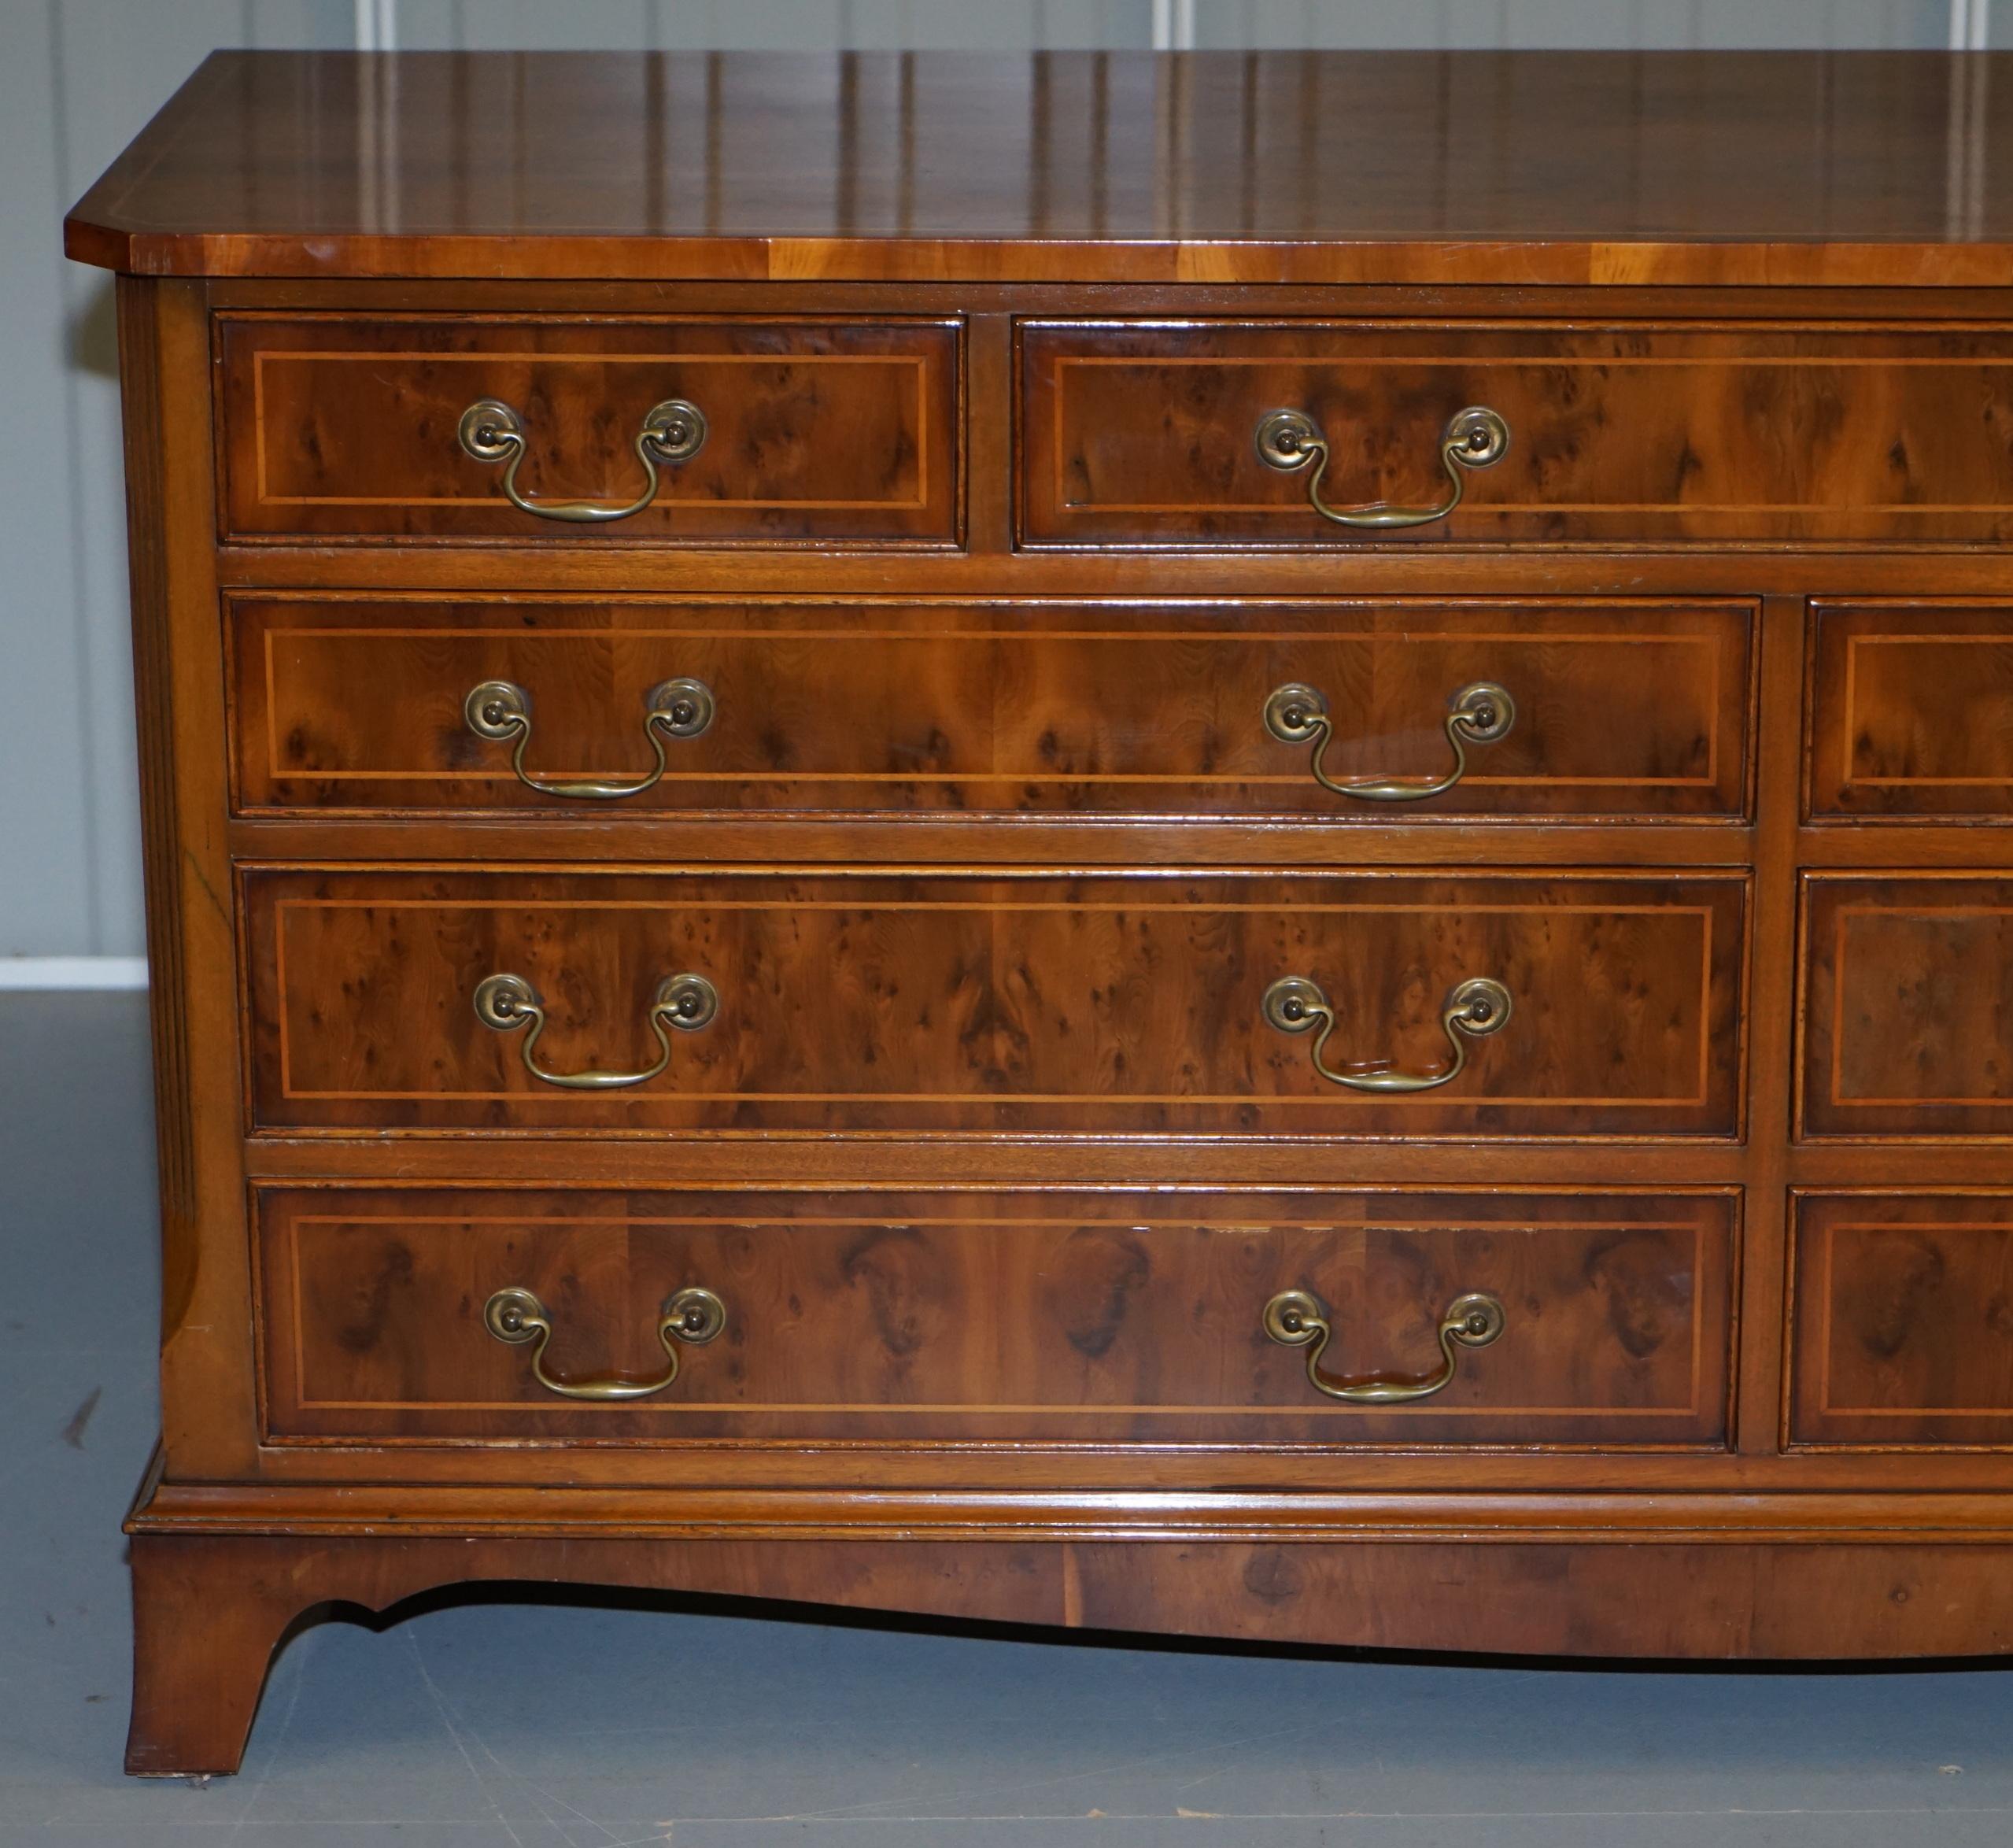 English Stunning Bevan Funnell Vintage Burr Figured Yew Wood Sideboard Chest of Drawers